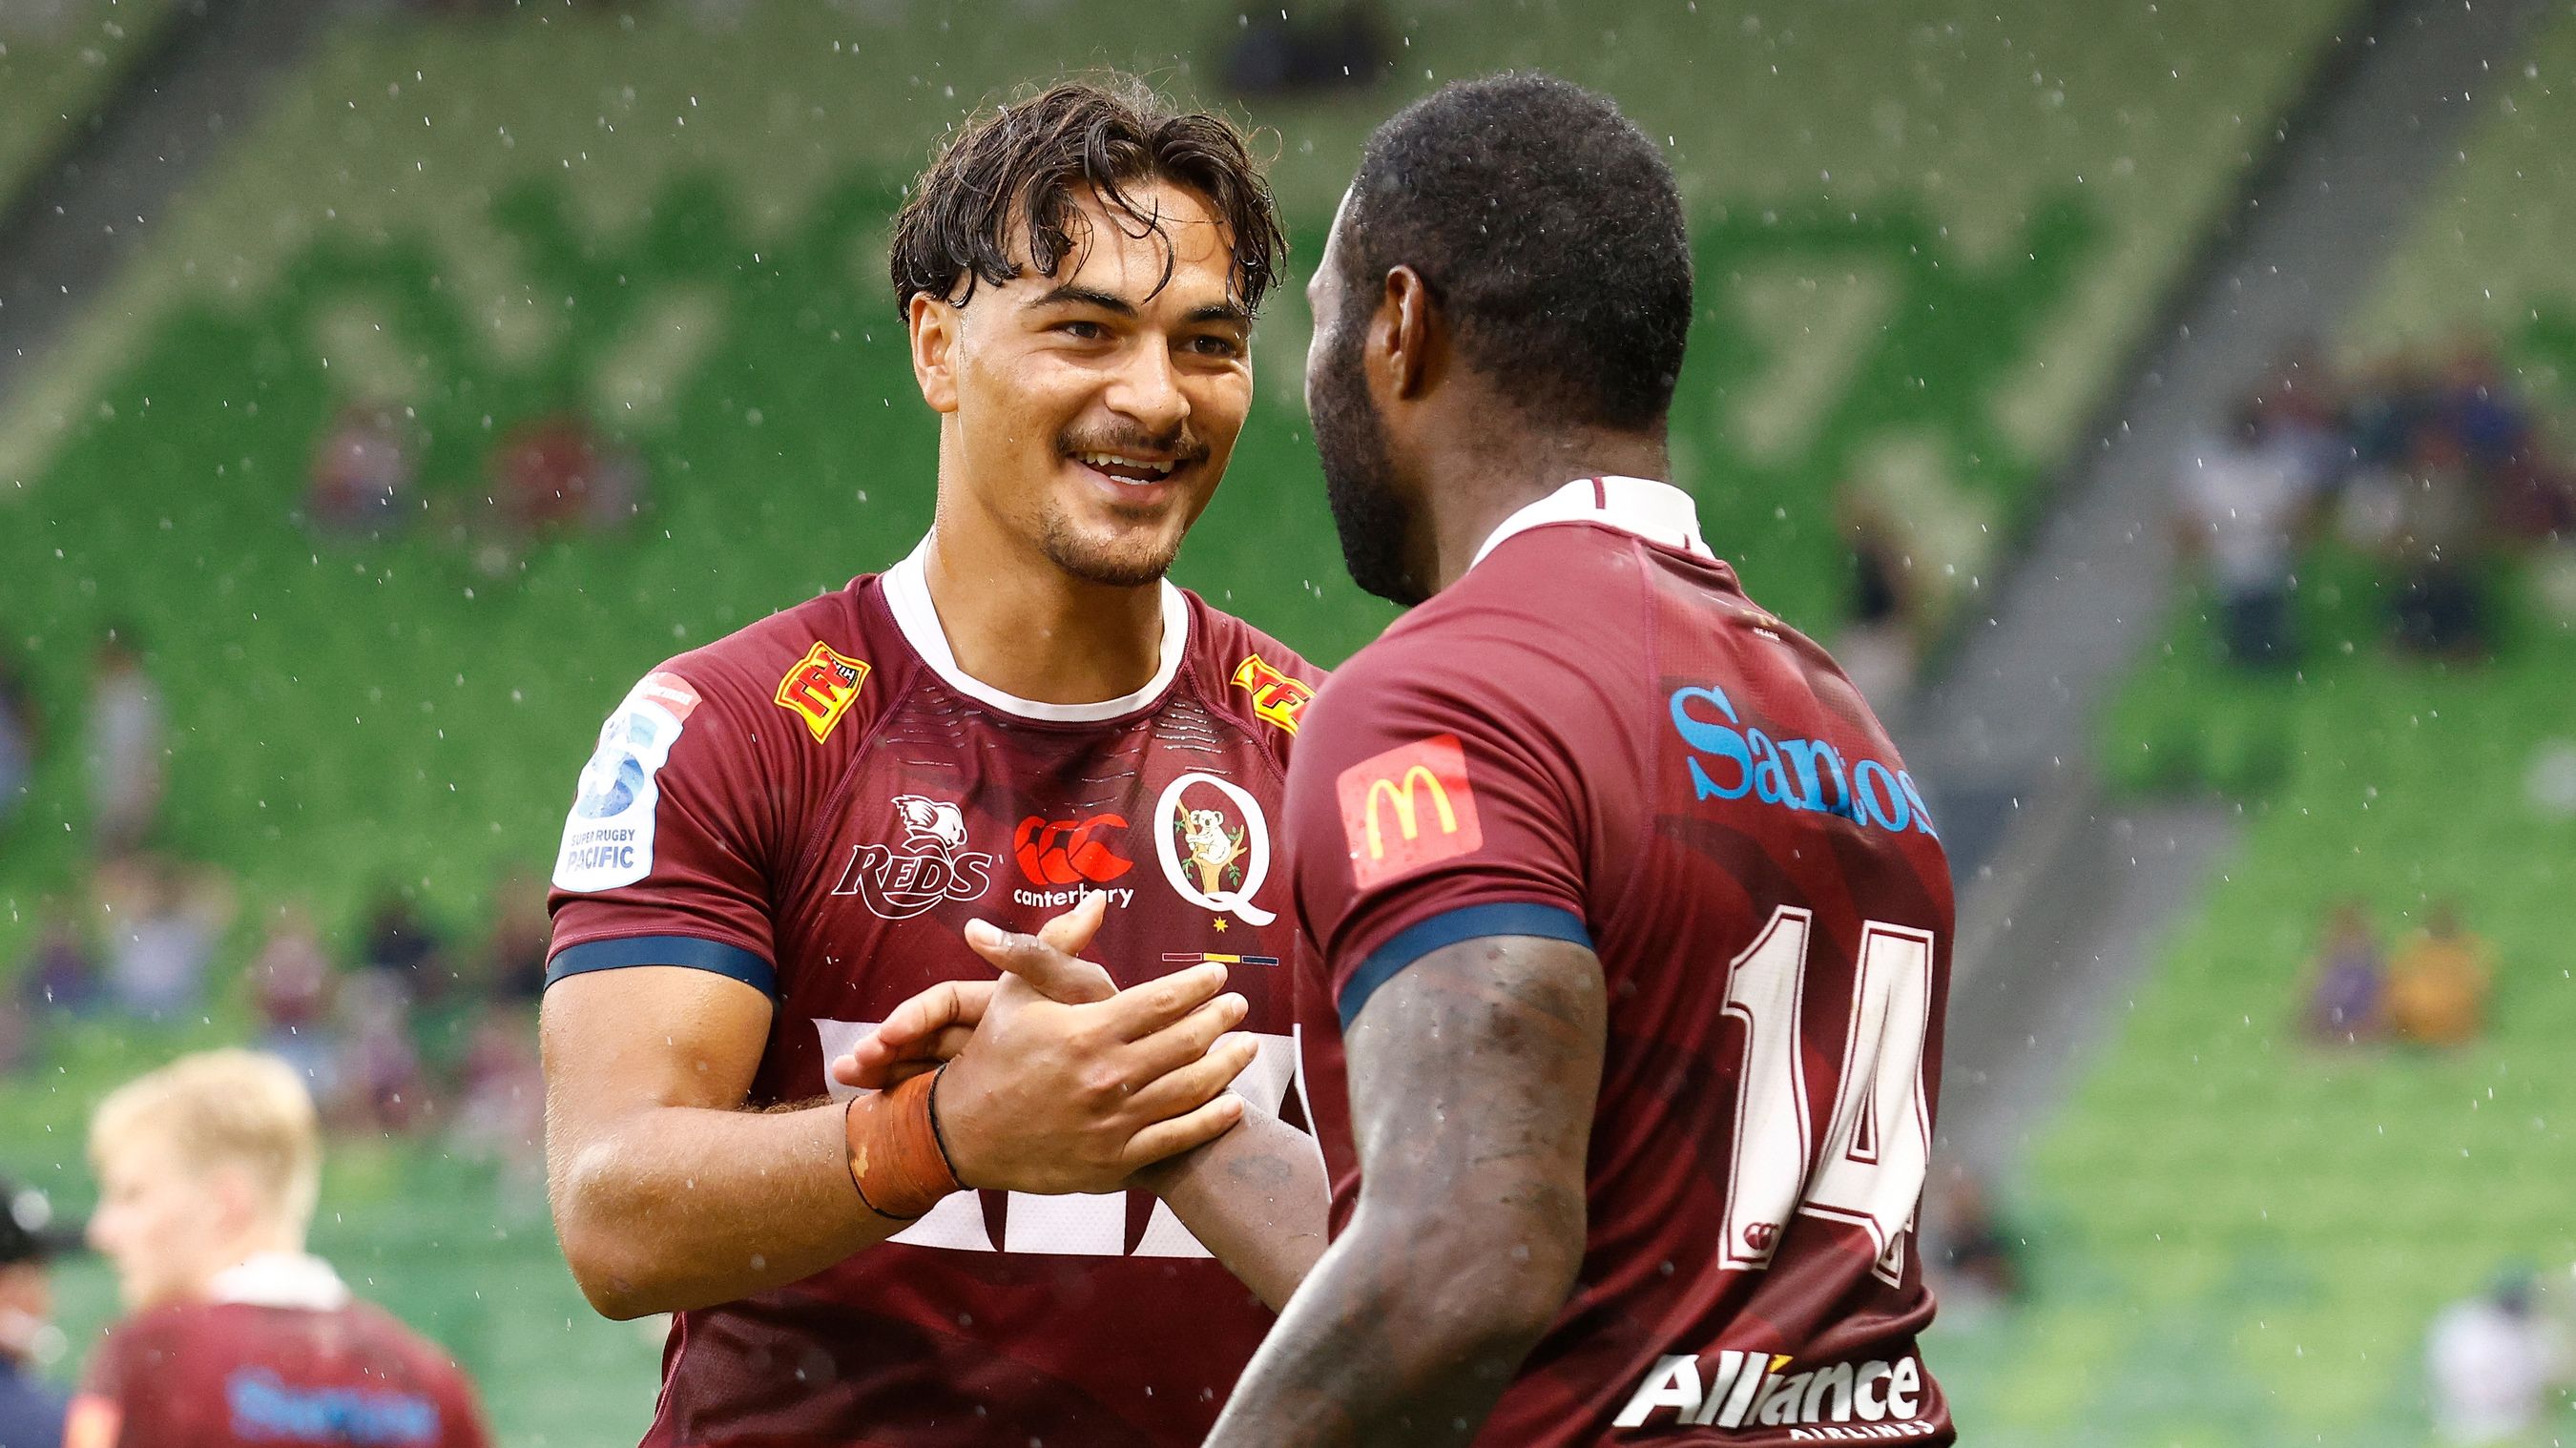 Jordan Petaia and Suliasi Vunivalu of the Reds celebrate victory during the round two Super Rugby Pacific over the Force.